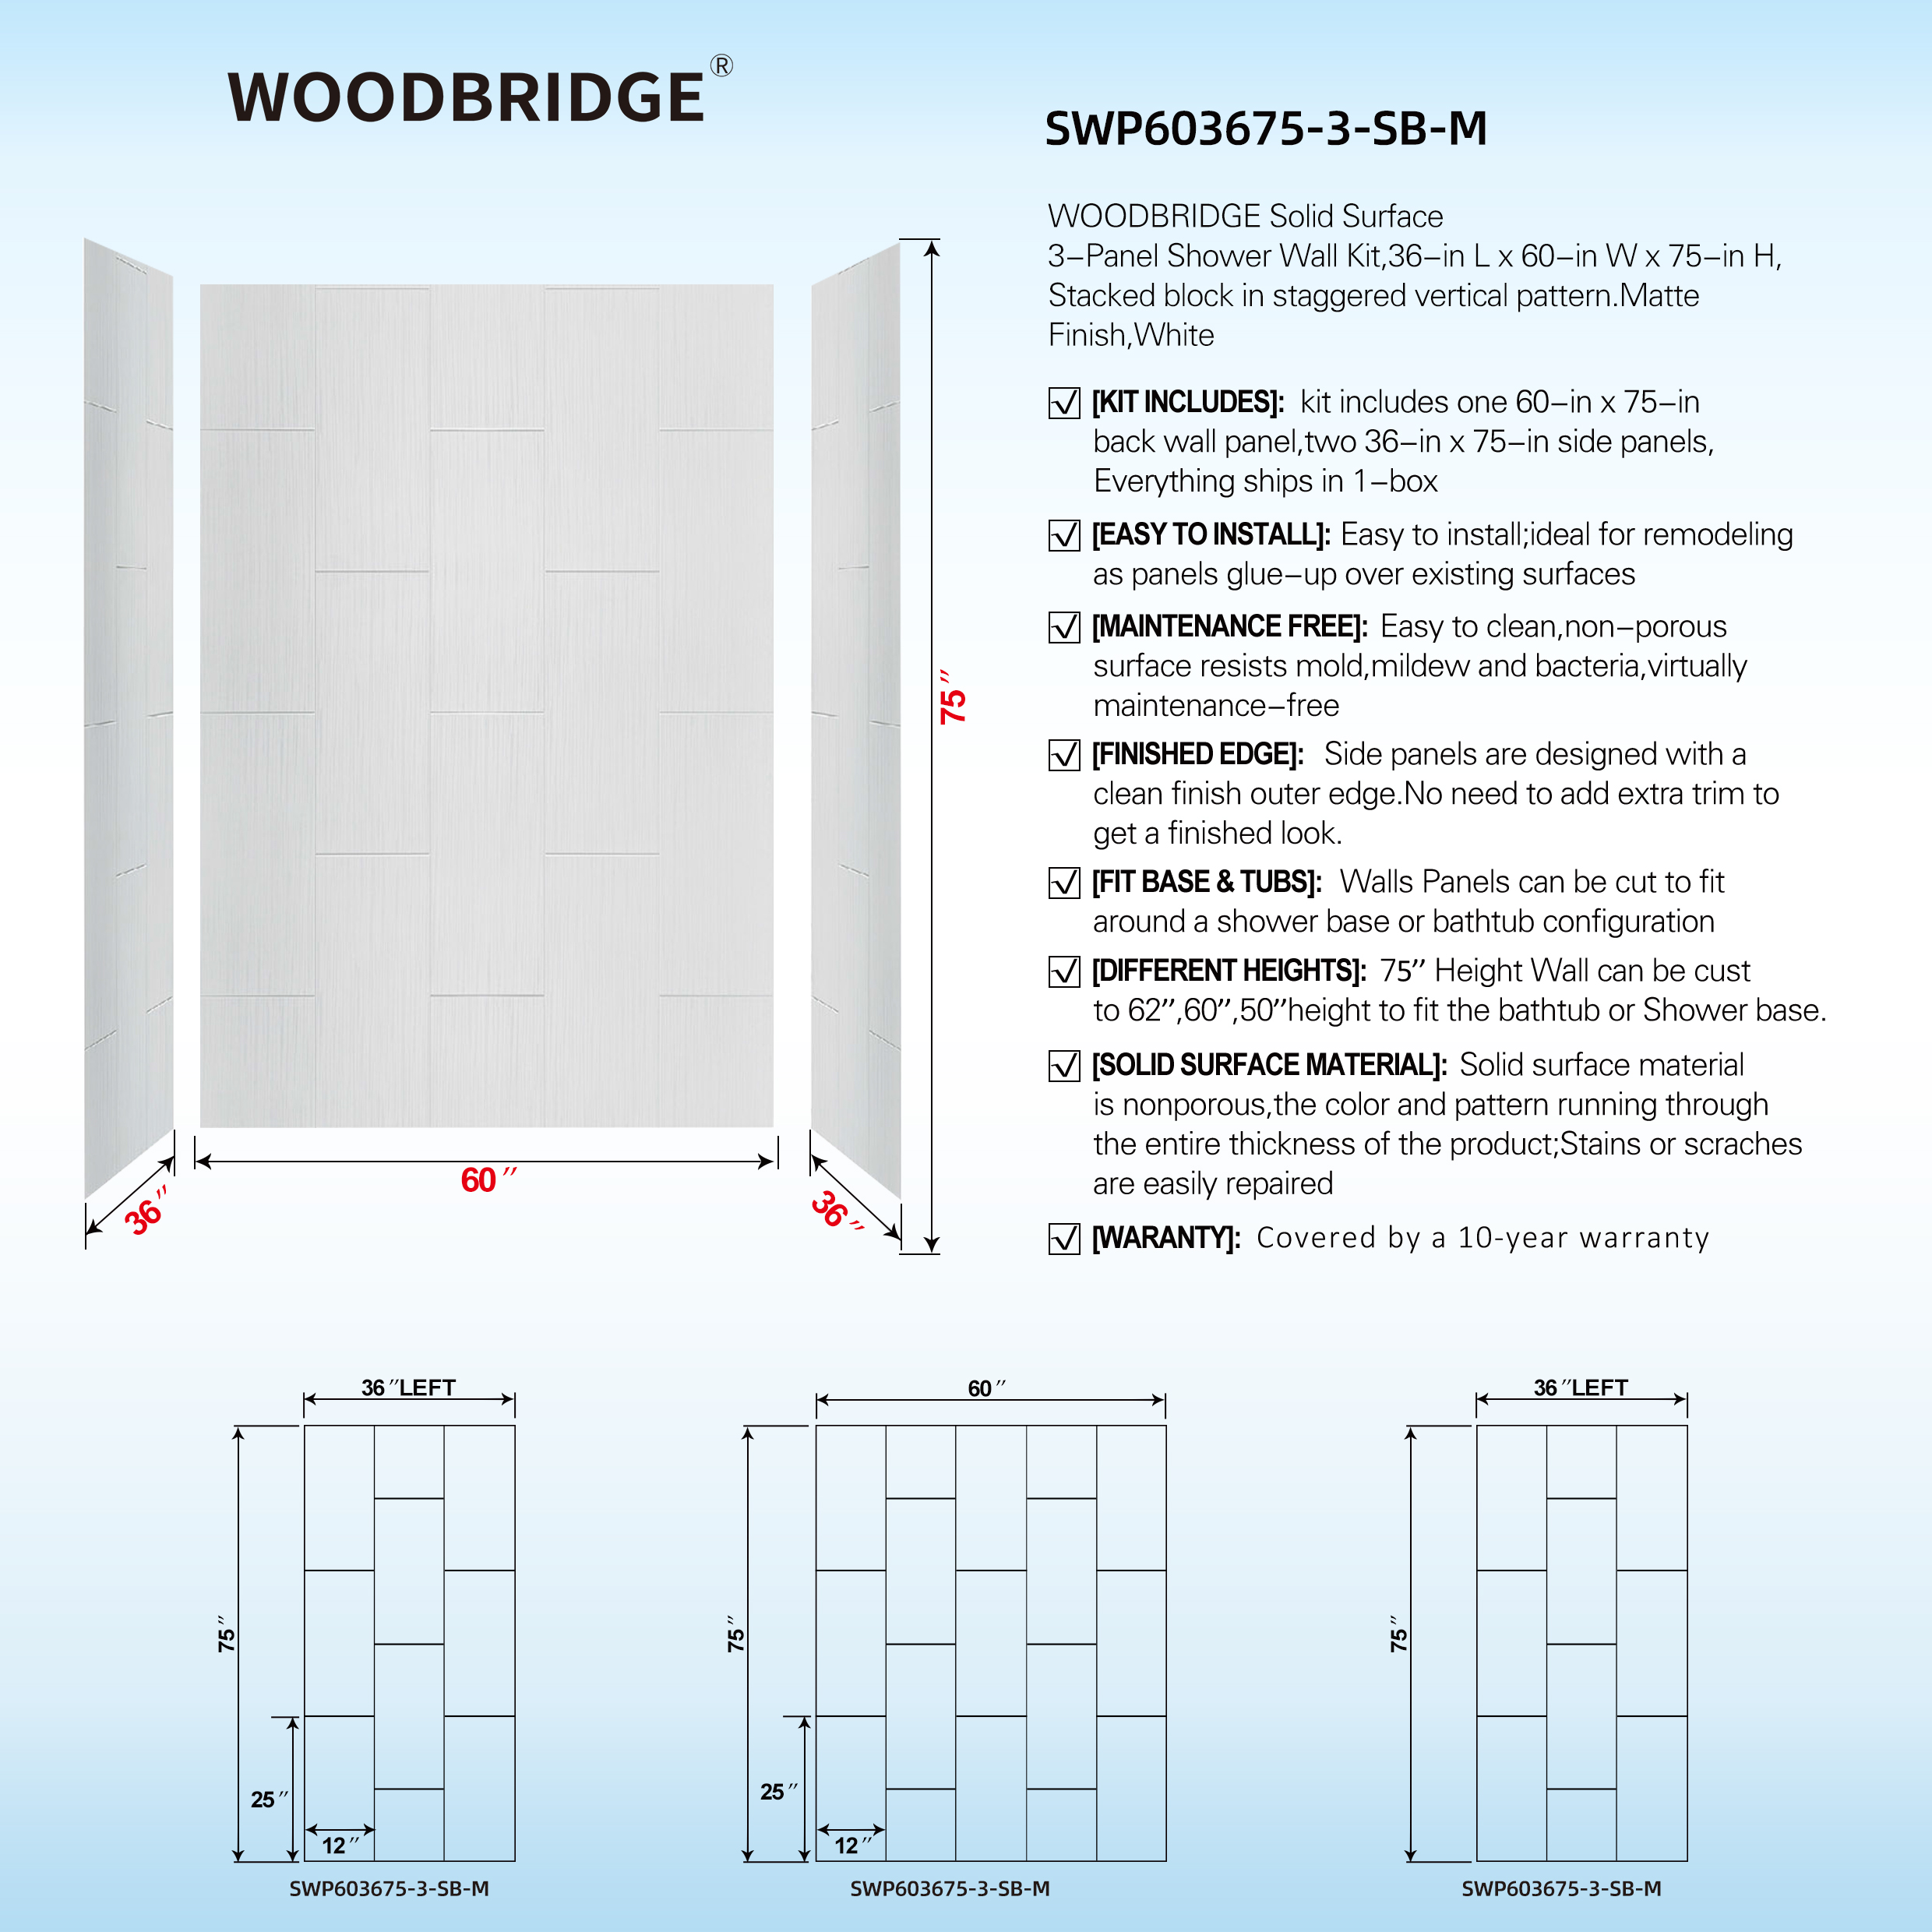  WOODBRIDGE Solid Surface 3-Panel Shower Wall Kit, 36-in L x 60-in W x 75-in H, Stacked Block in a Staggered Vertical Pattern. Matte White Finish_11717